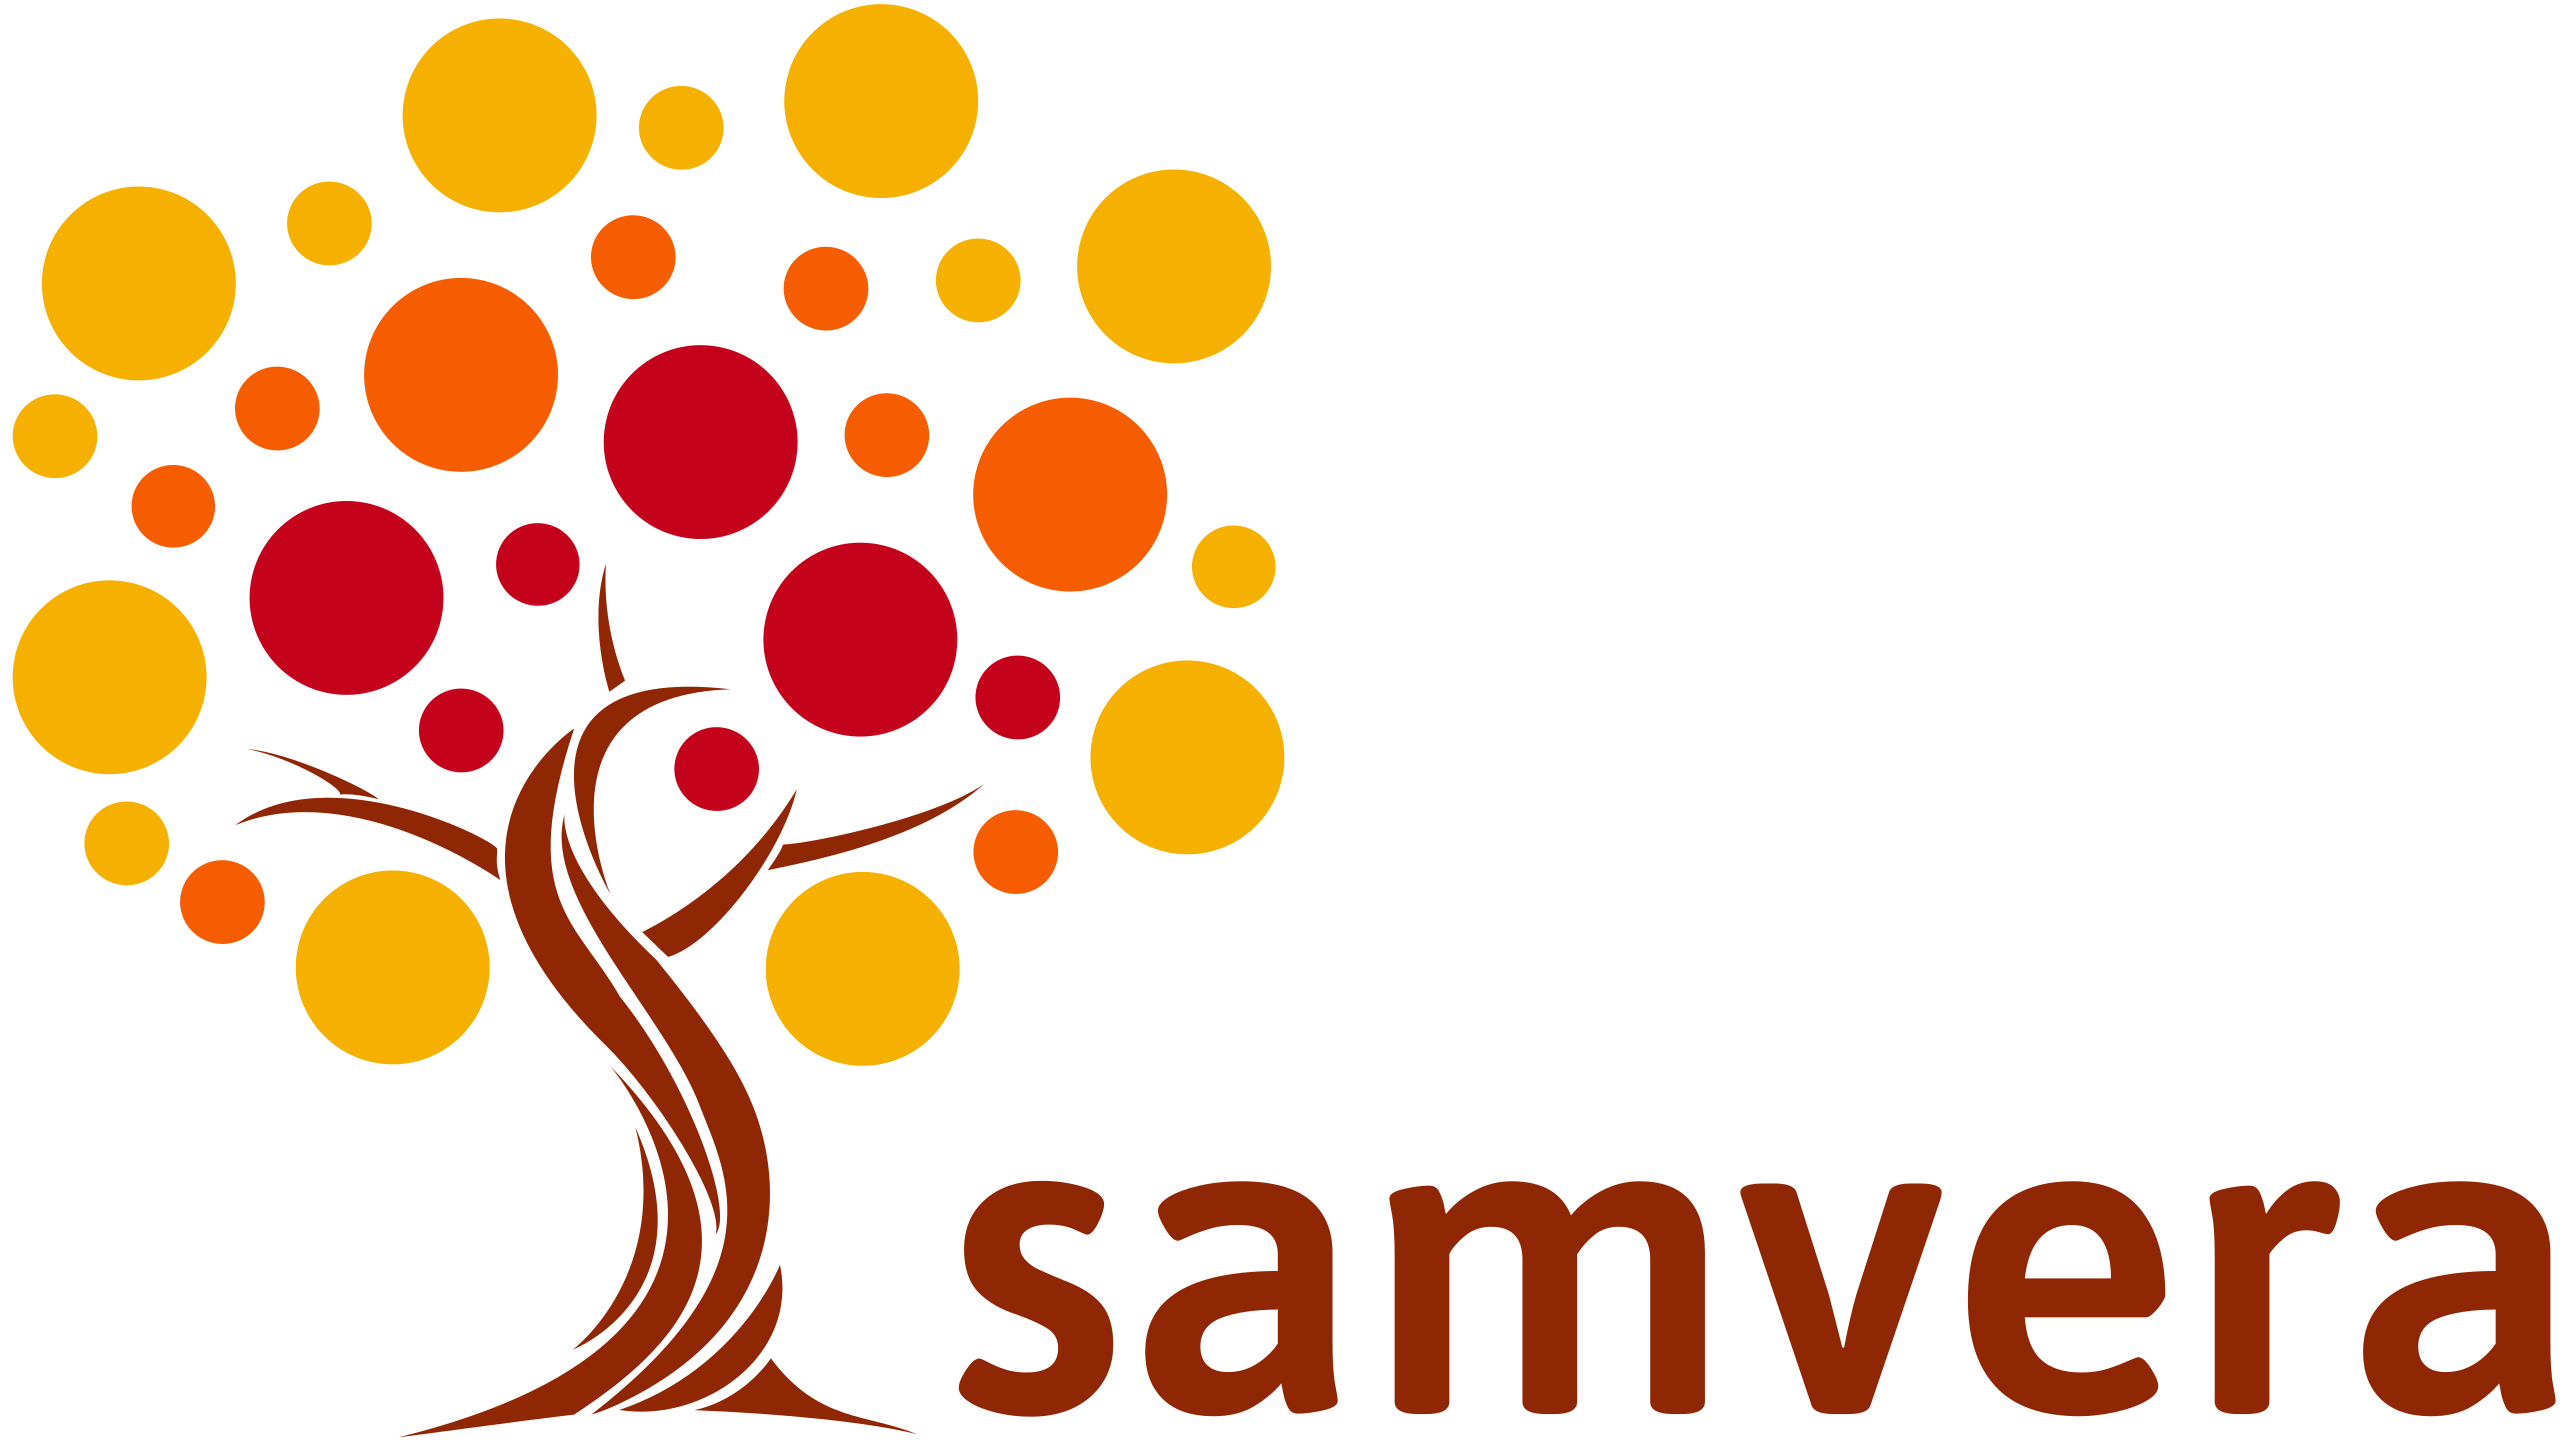 Samvera logo, depicting a tree illustration with a brown trunk and yellow, orange, and red circles of various sizes representing leaves.